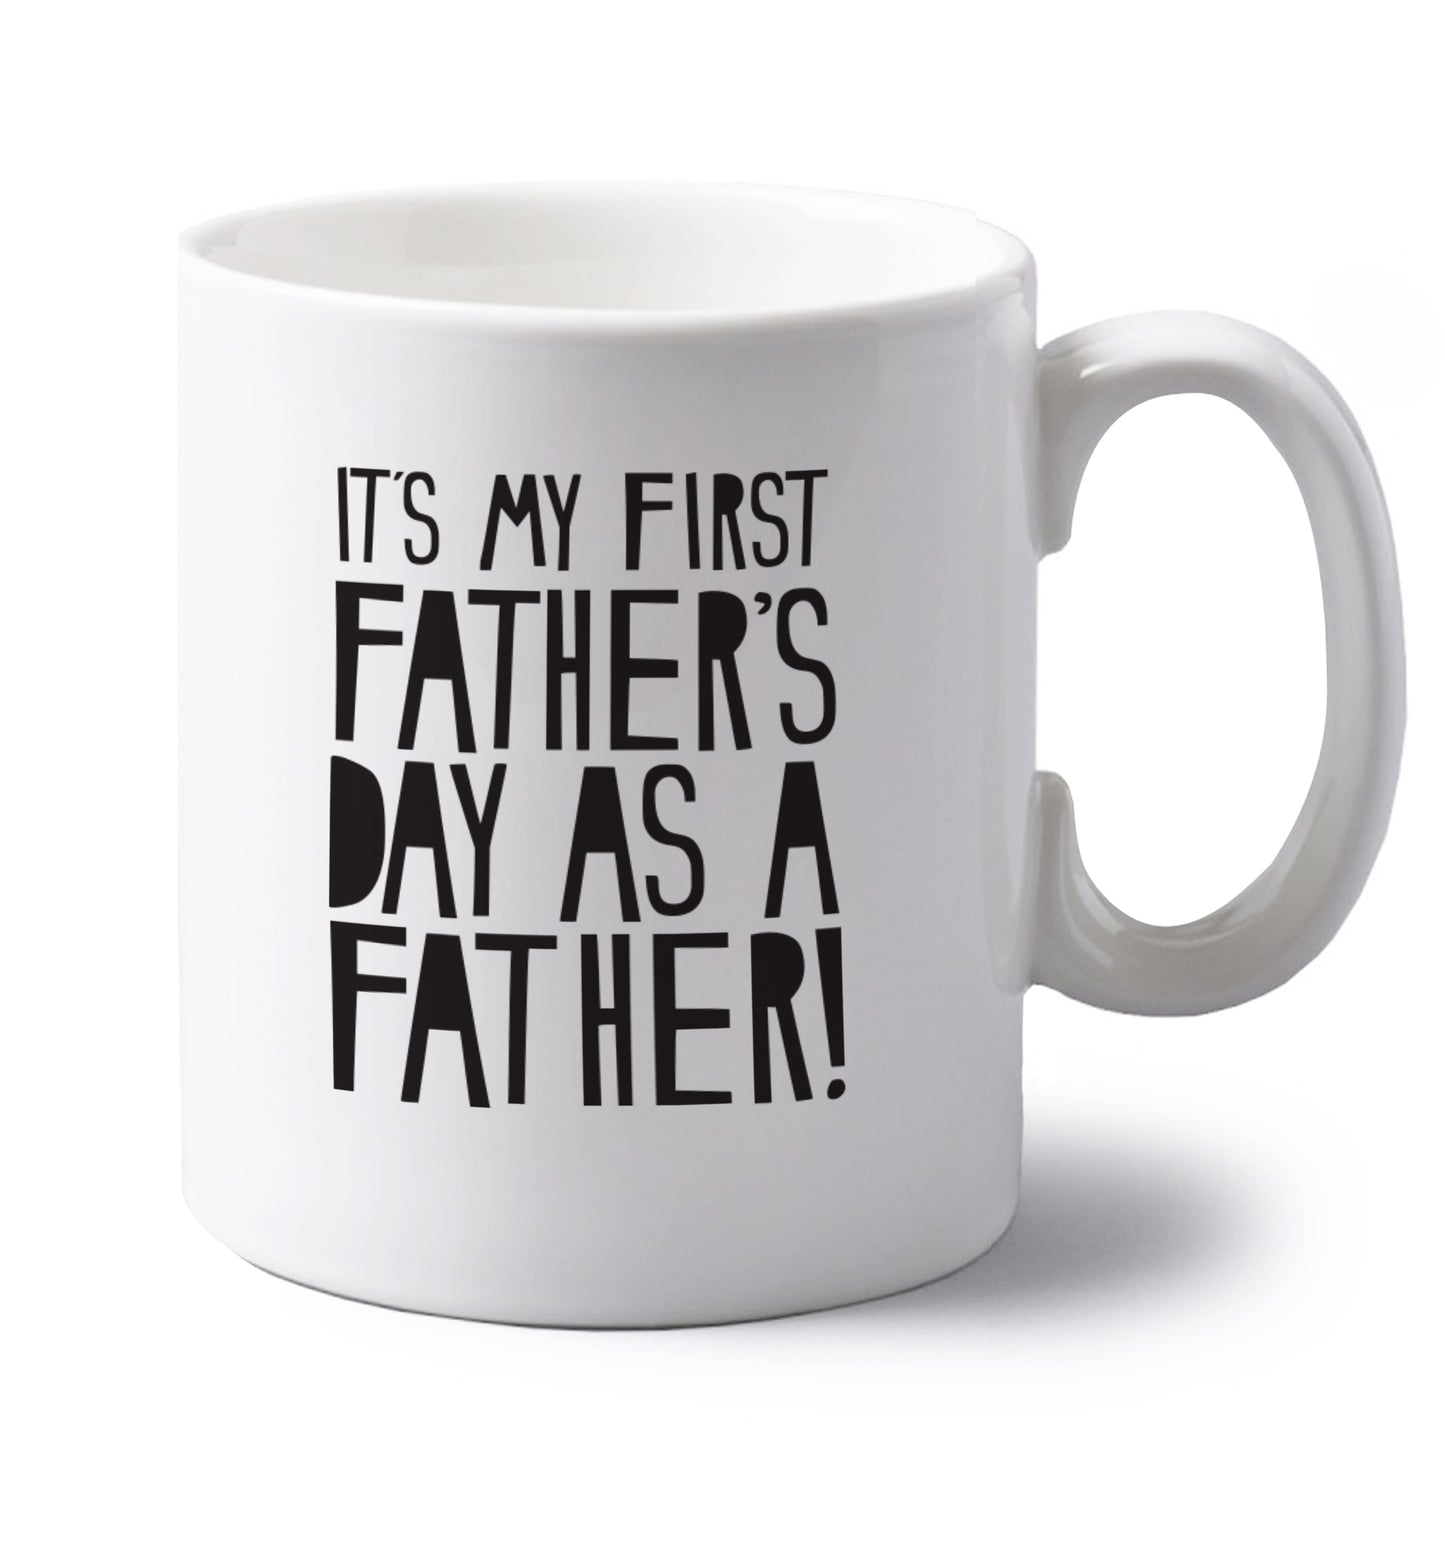 It's my first Father's Day as a father! left handed white ceramic mug 